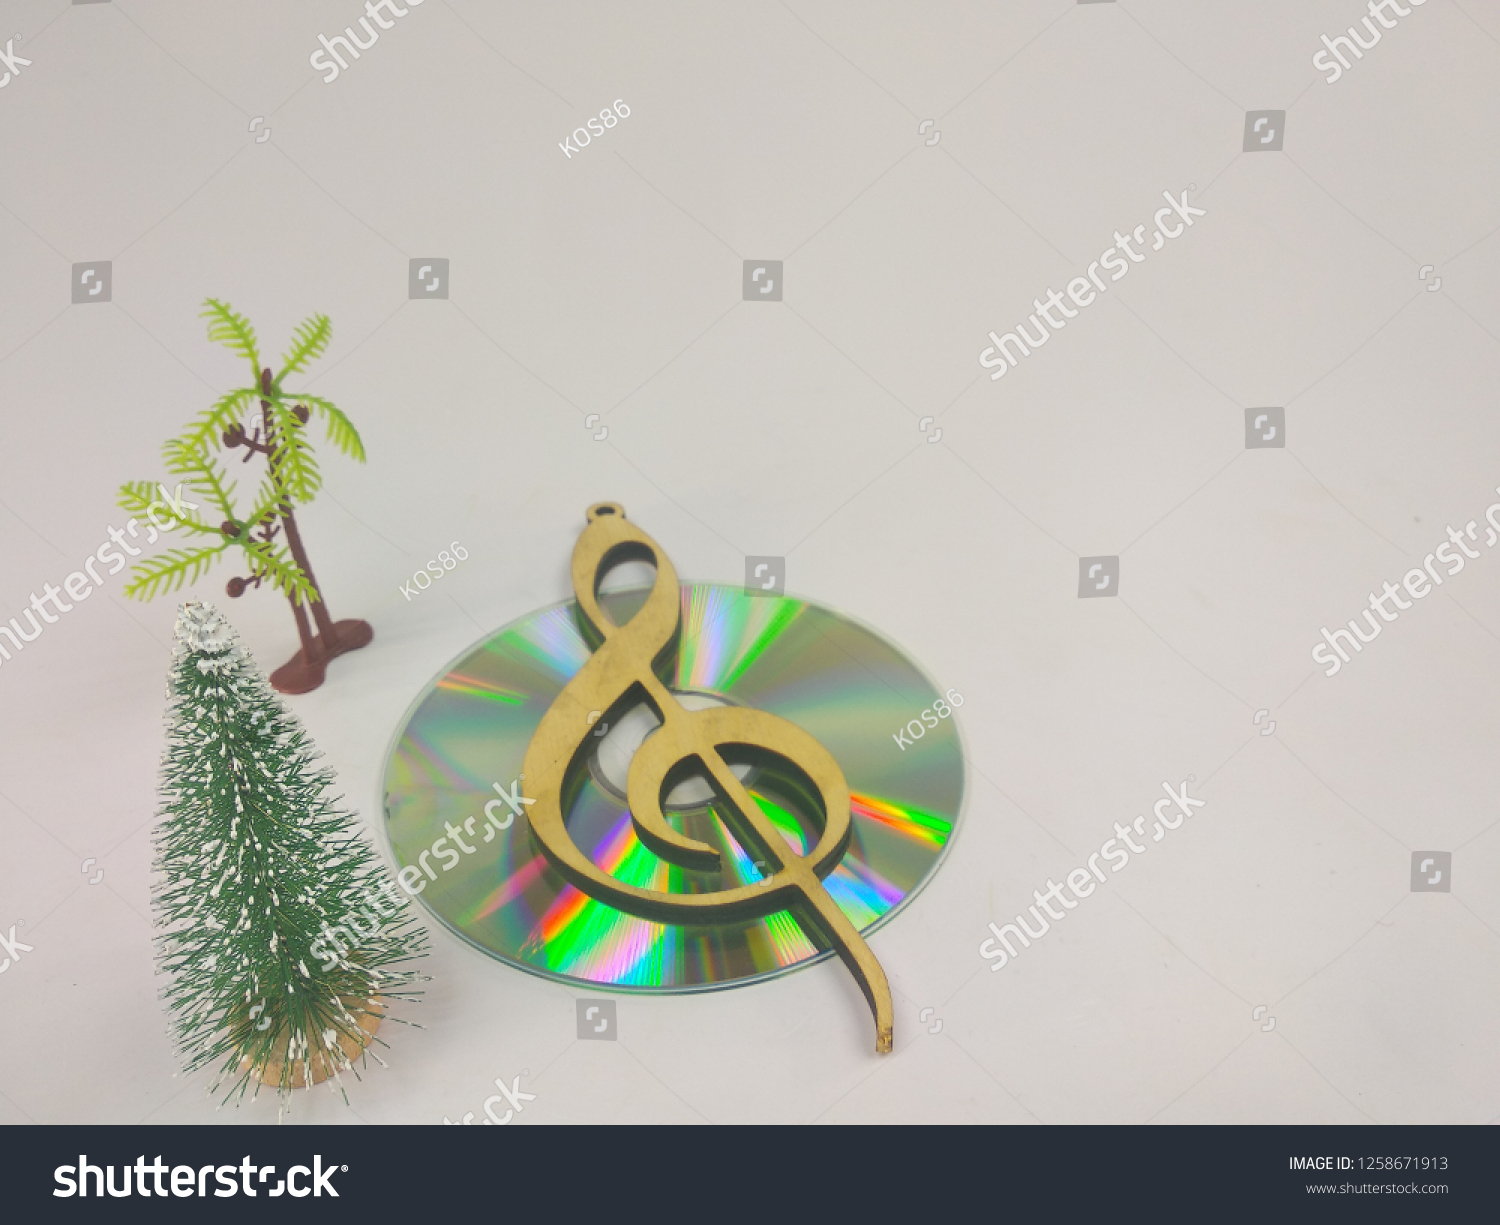 compact discs on a white background.HD. #1258671913